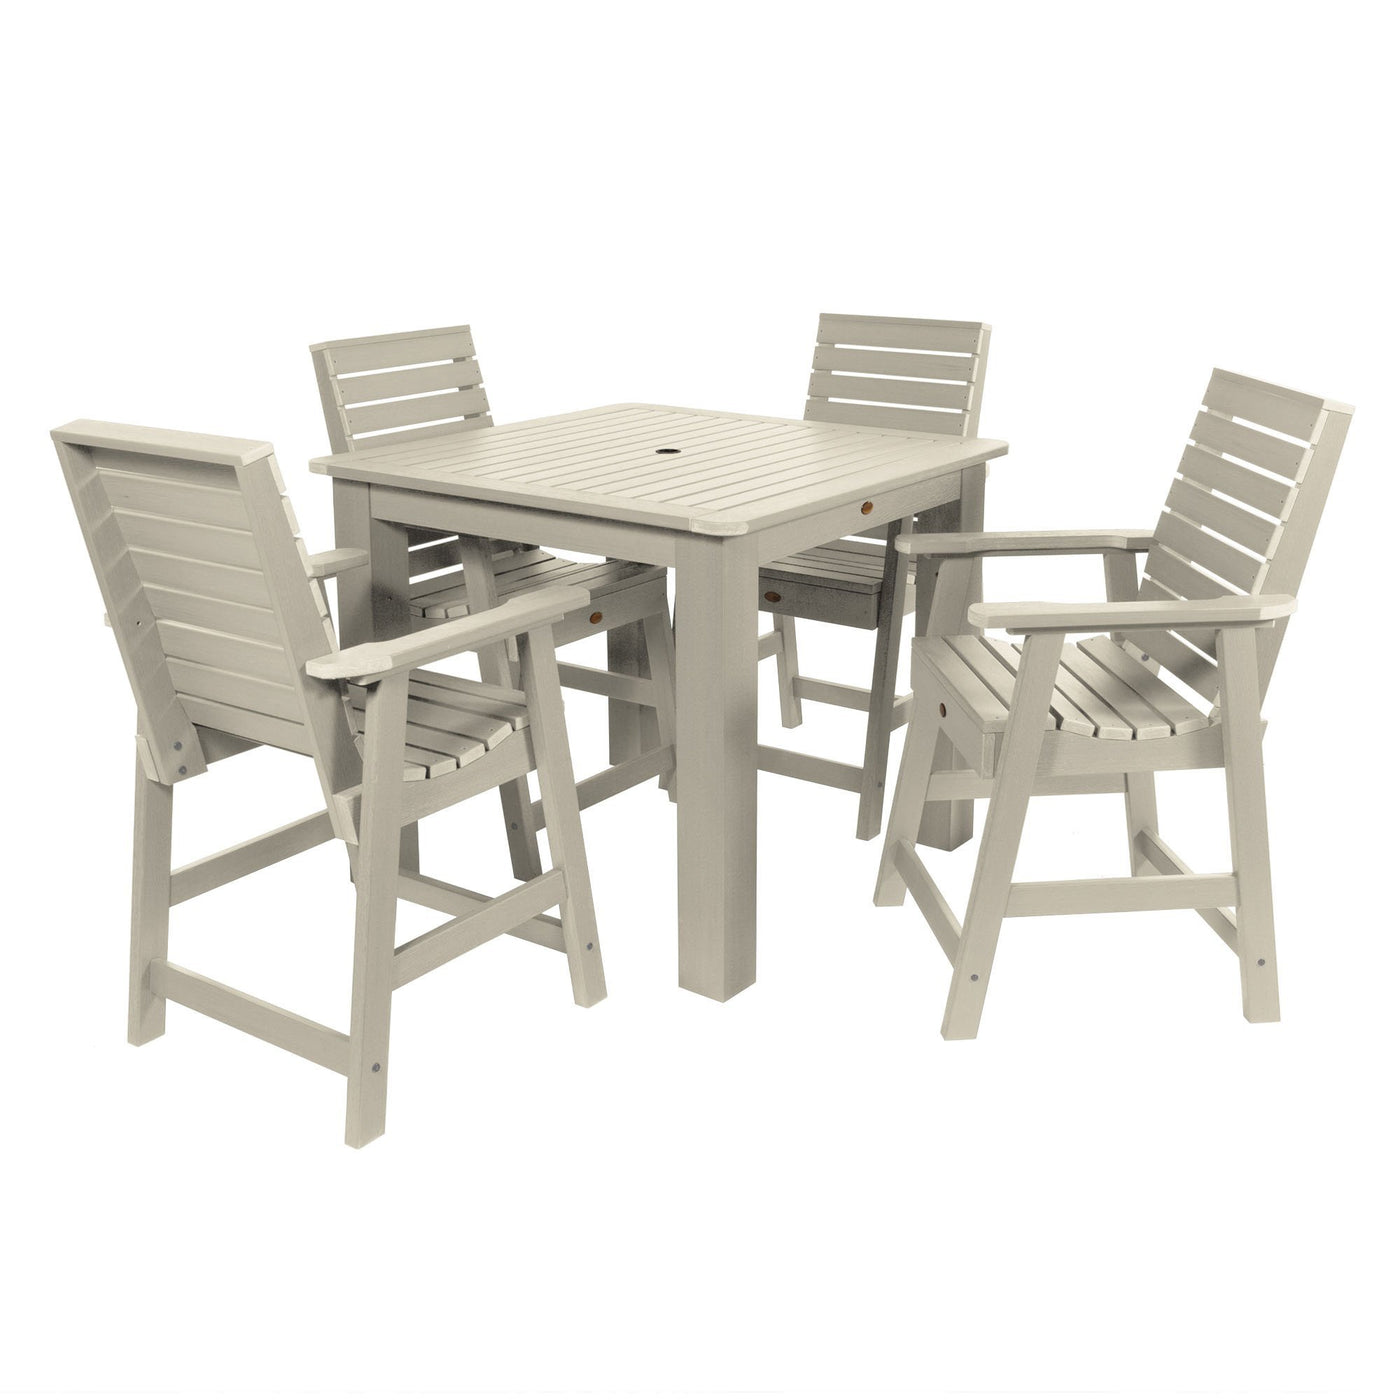 Weatherly 5pc Square Dining Set 42in x 42in- Counter Height Dining Highwood USA Whitewash 